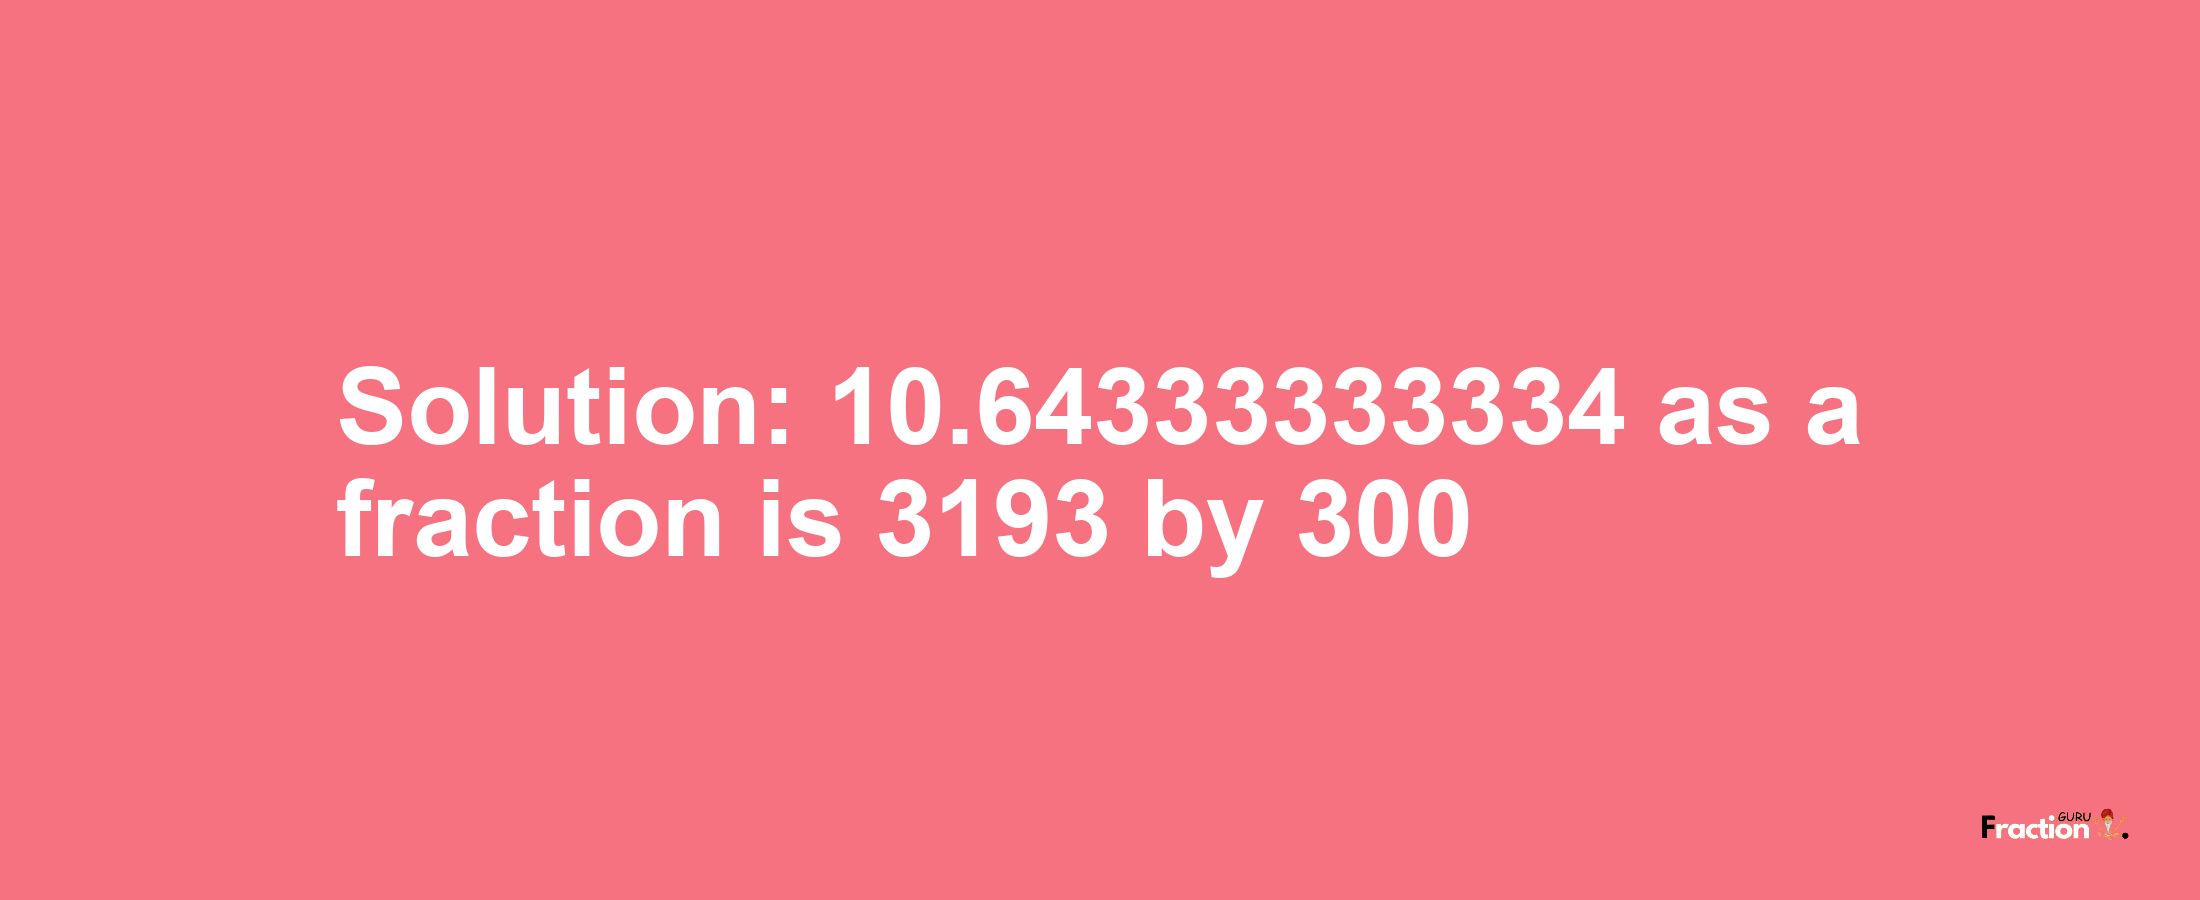 Solution:10.64333333334 as a fraction is 3193/300